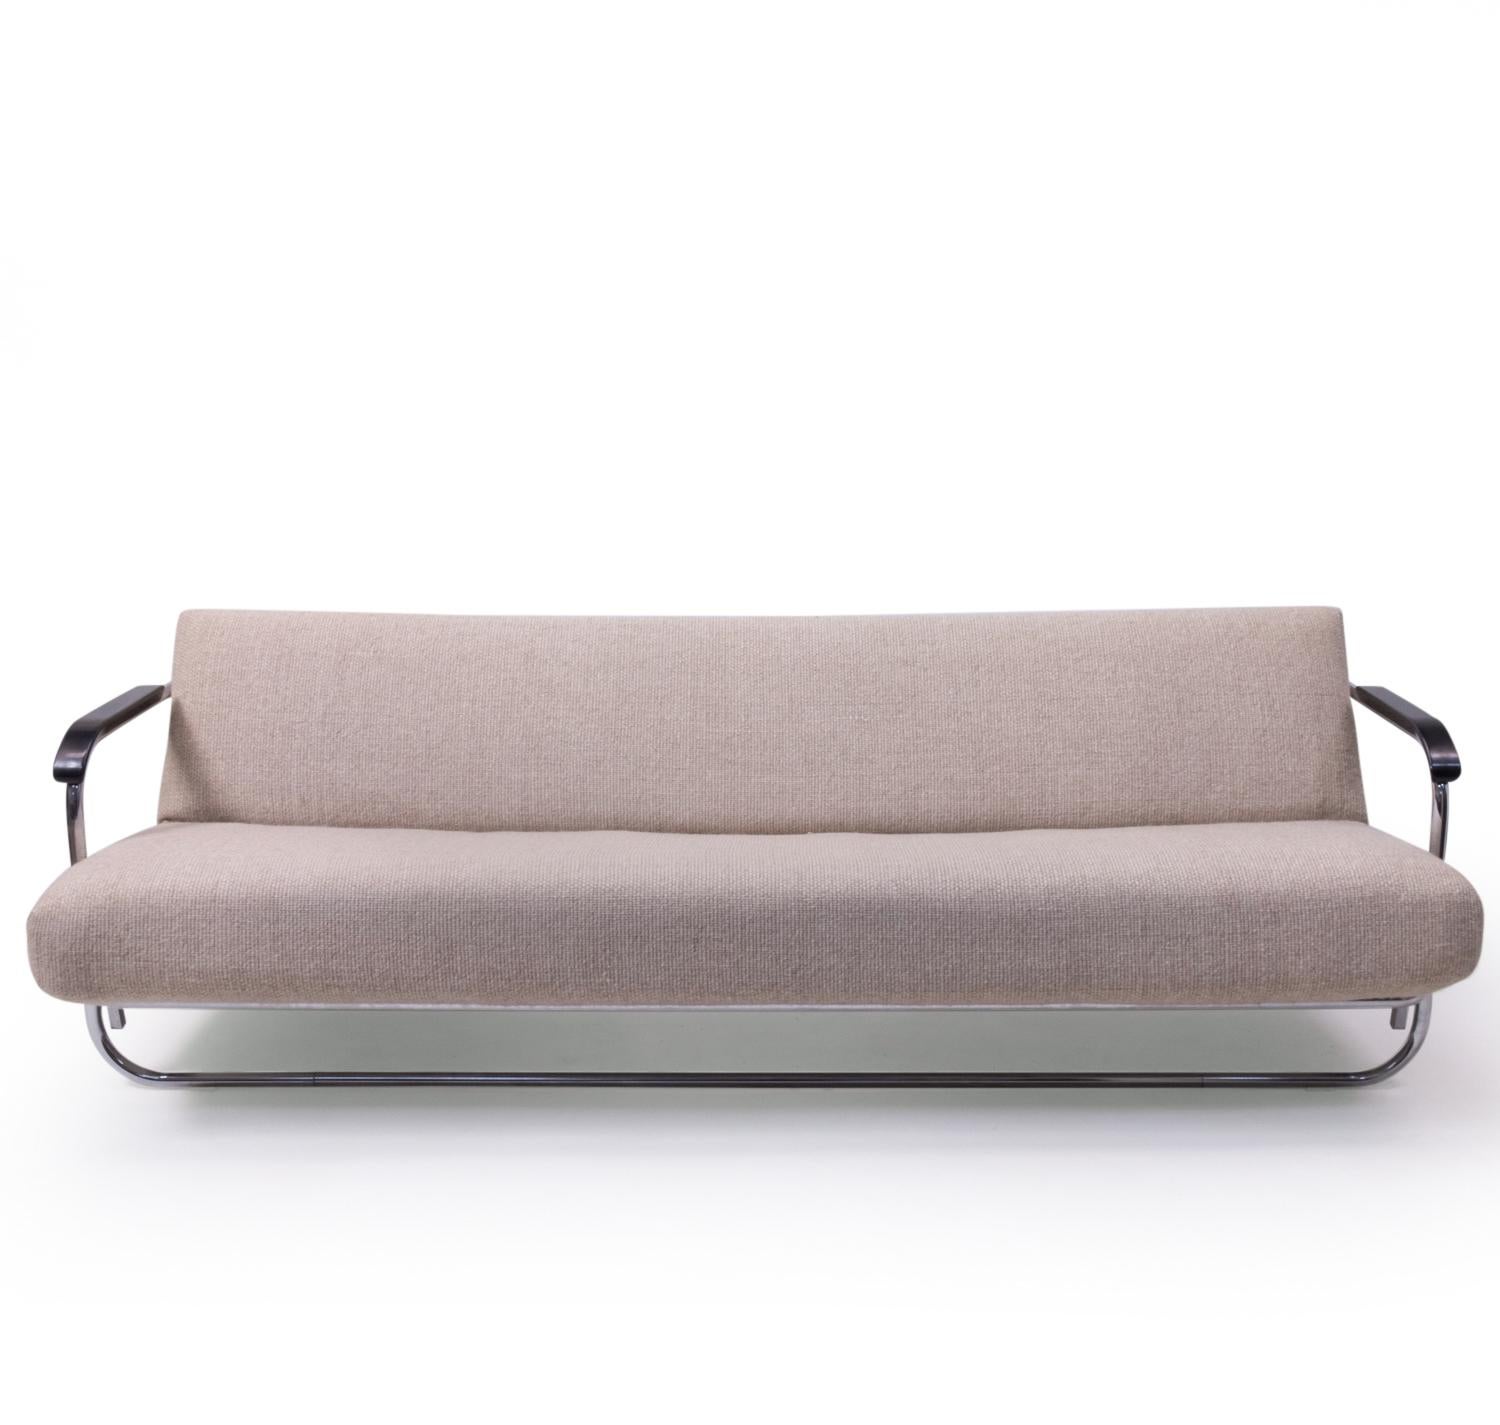 A true Classic by Alvar Aalto, designed during the 1930s, for use in smaller spaces such as apartments.

The three-seater sofa doubles as a bed (91cm wide) and the backrest can be tilted into several positions. The No 36 sofa was produced in